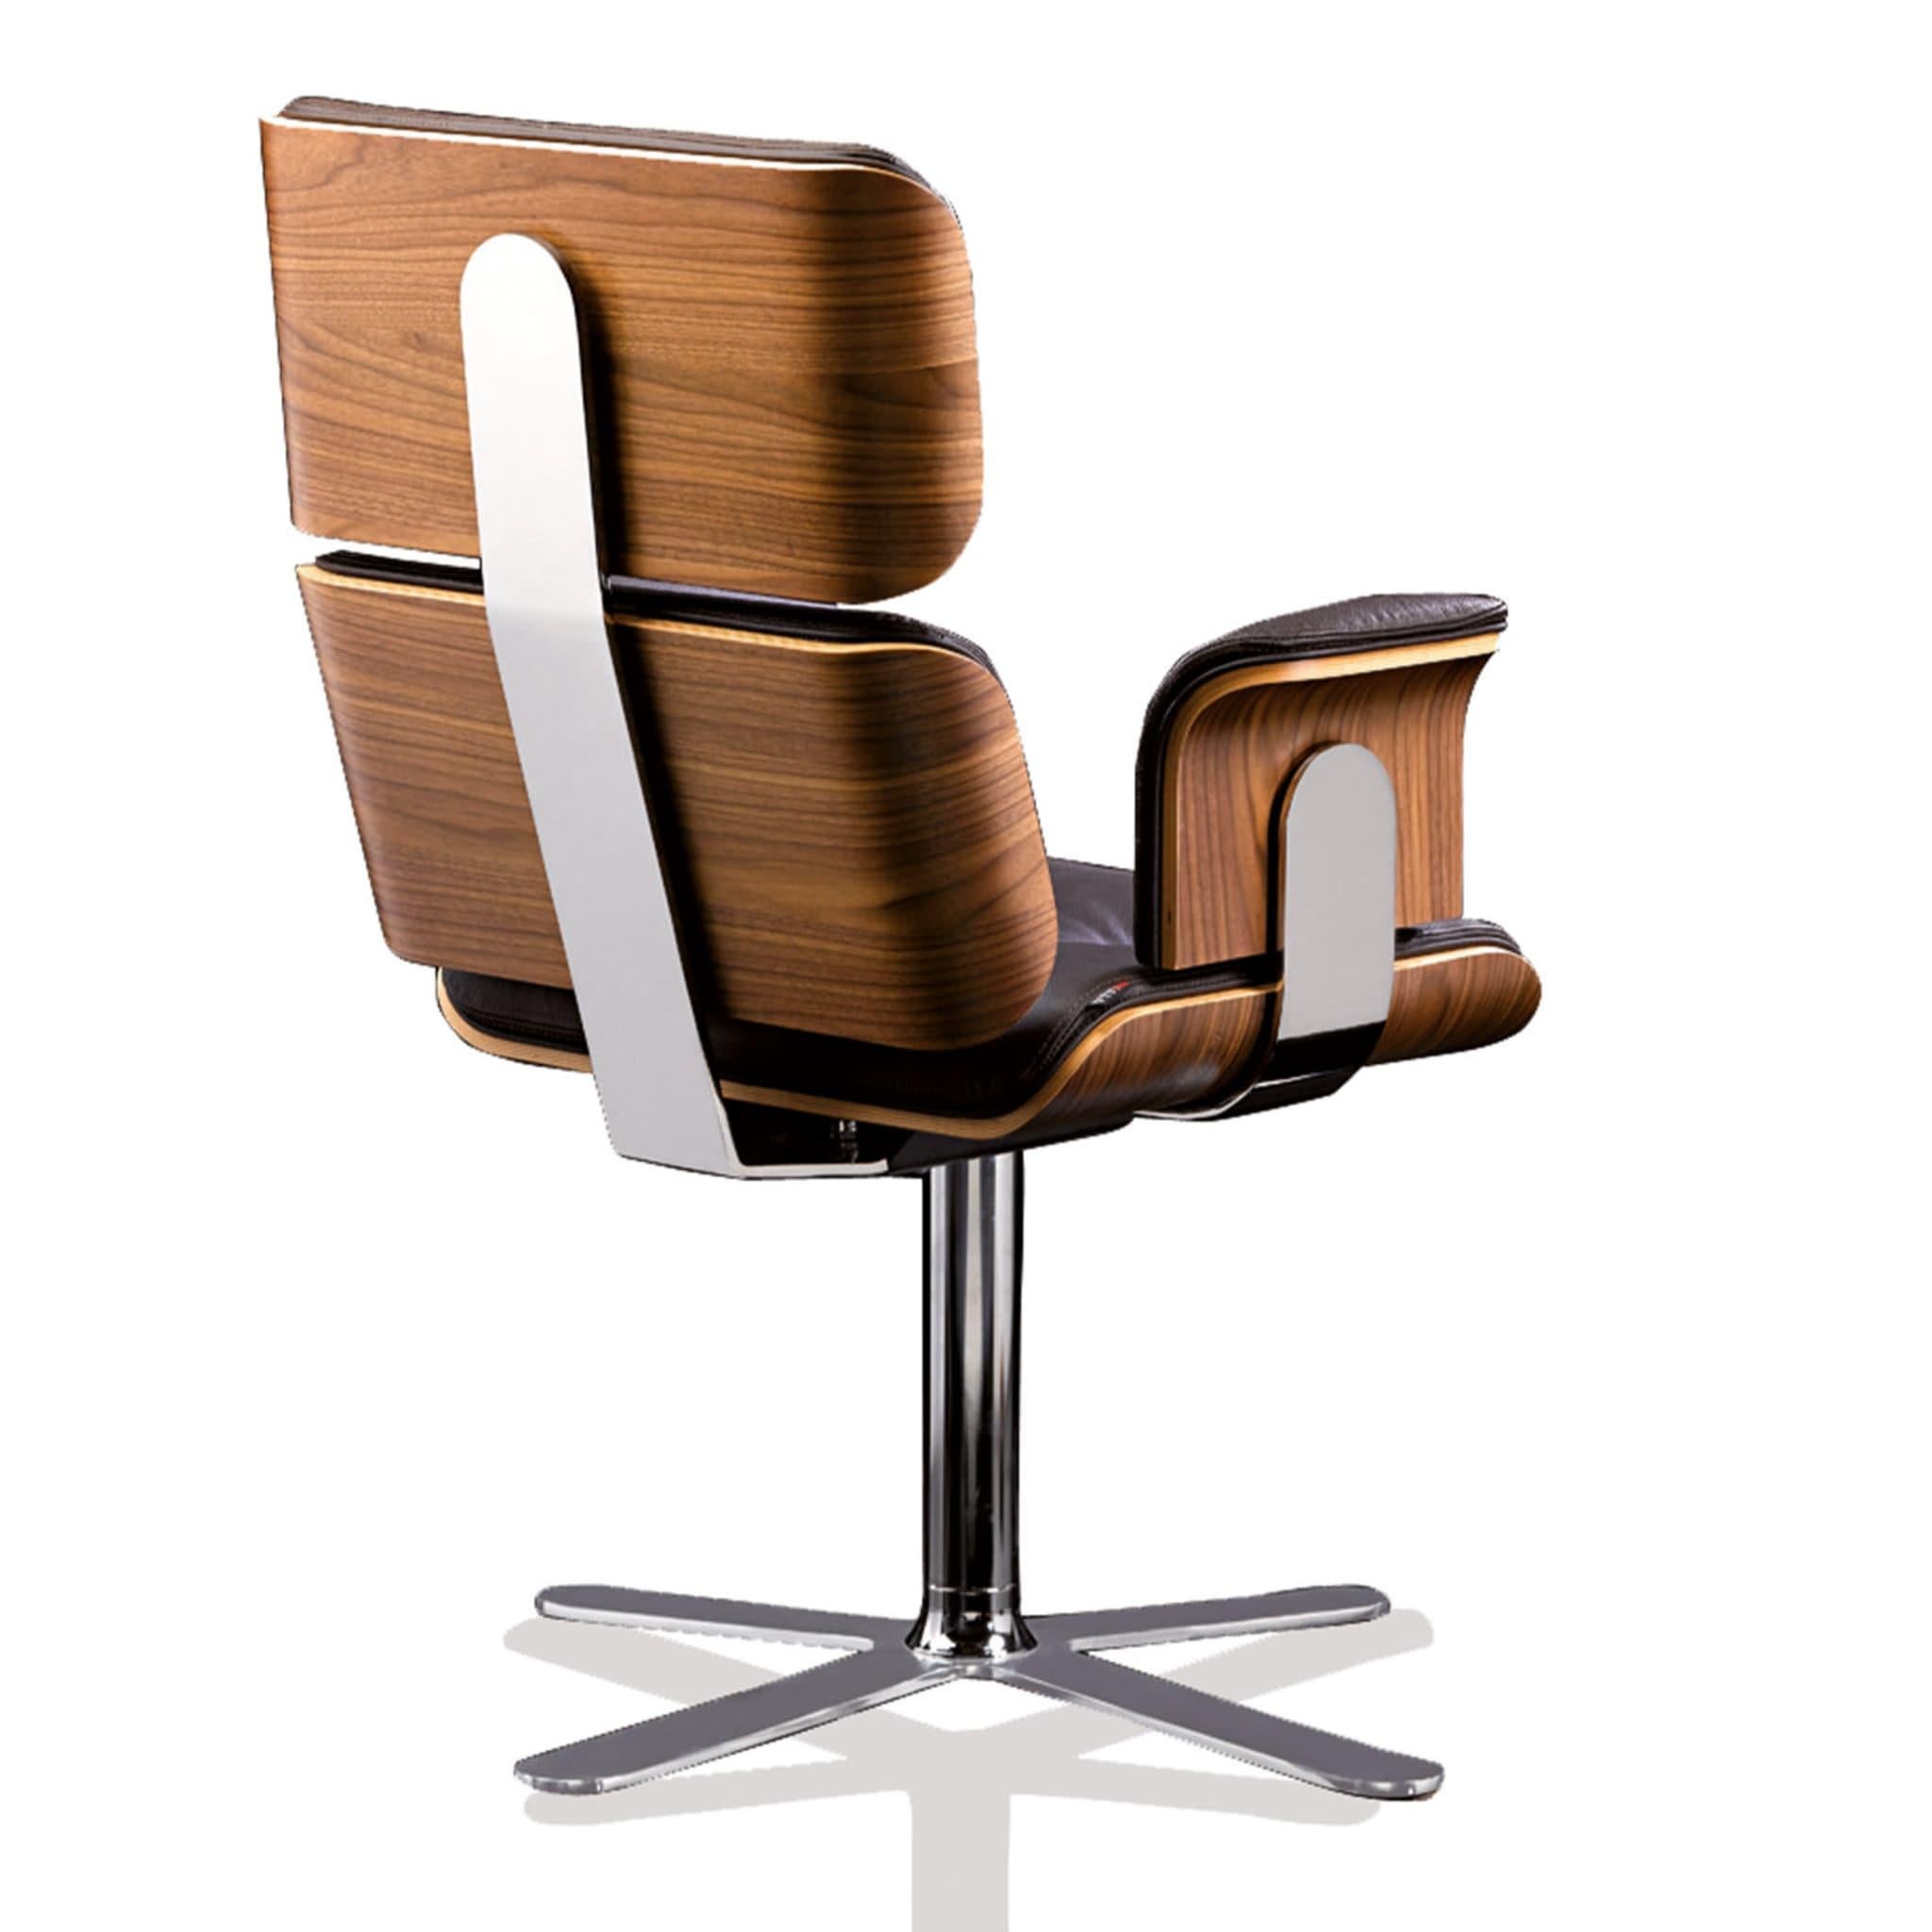 Well-balanced and superbly built, this office armchair of the Armadillo line is an exclusive design by Rainer Bachshmid available also without armrests and in the high back lounge version. Featuring a 4-star steel chrome base with a seat-return